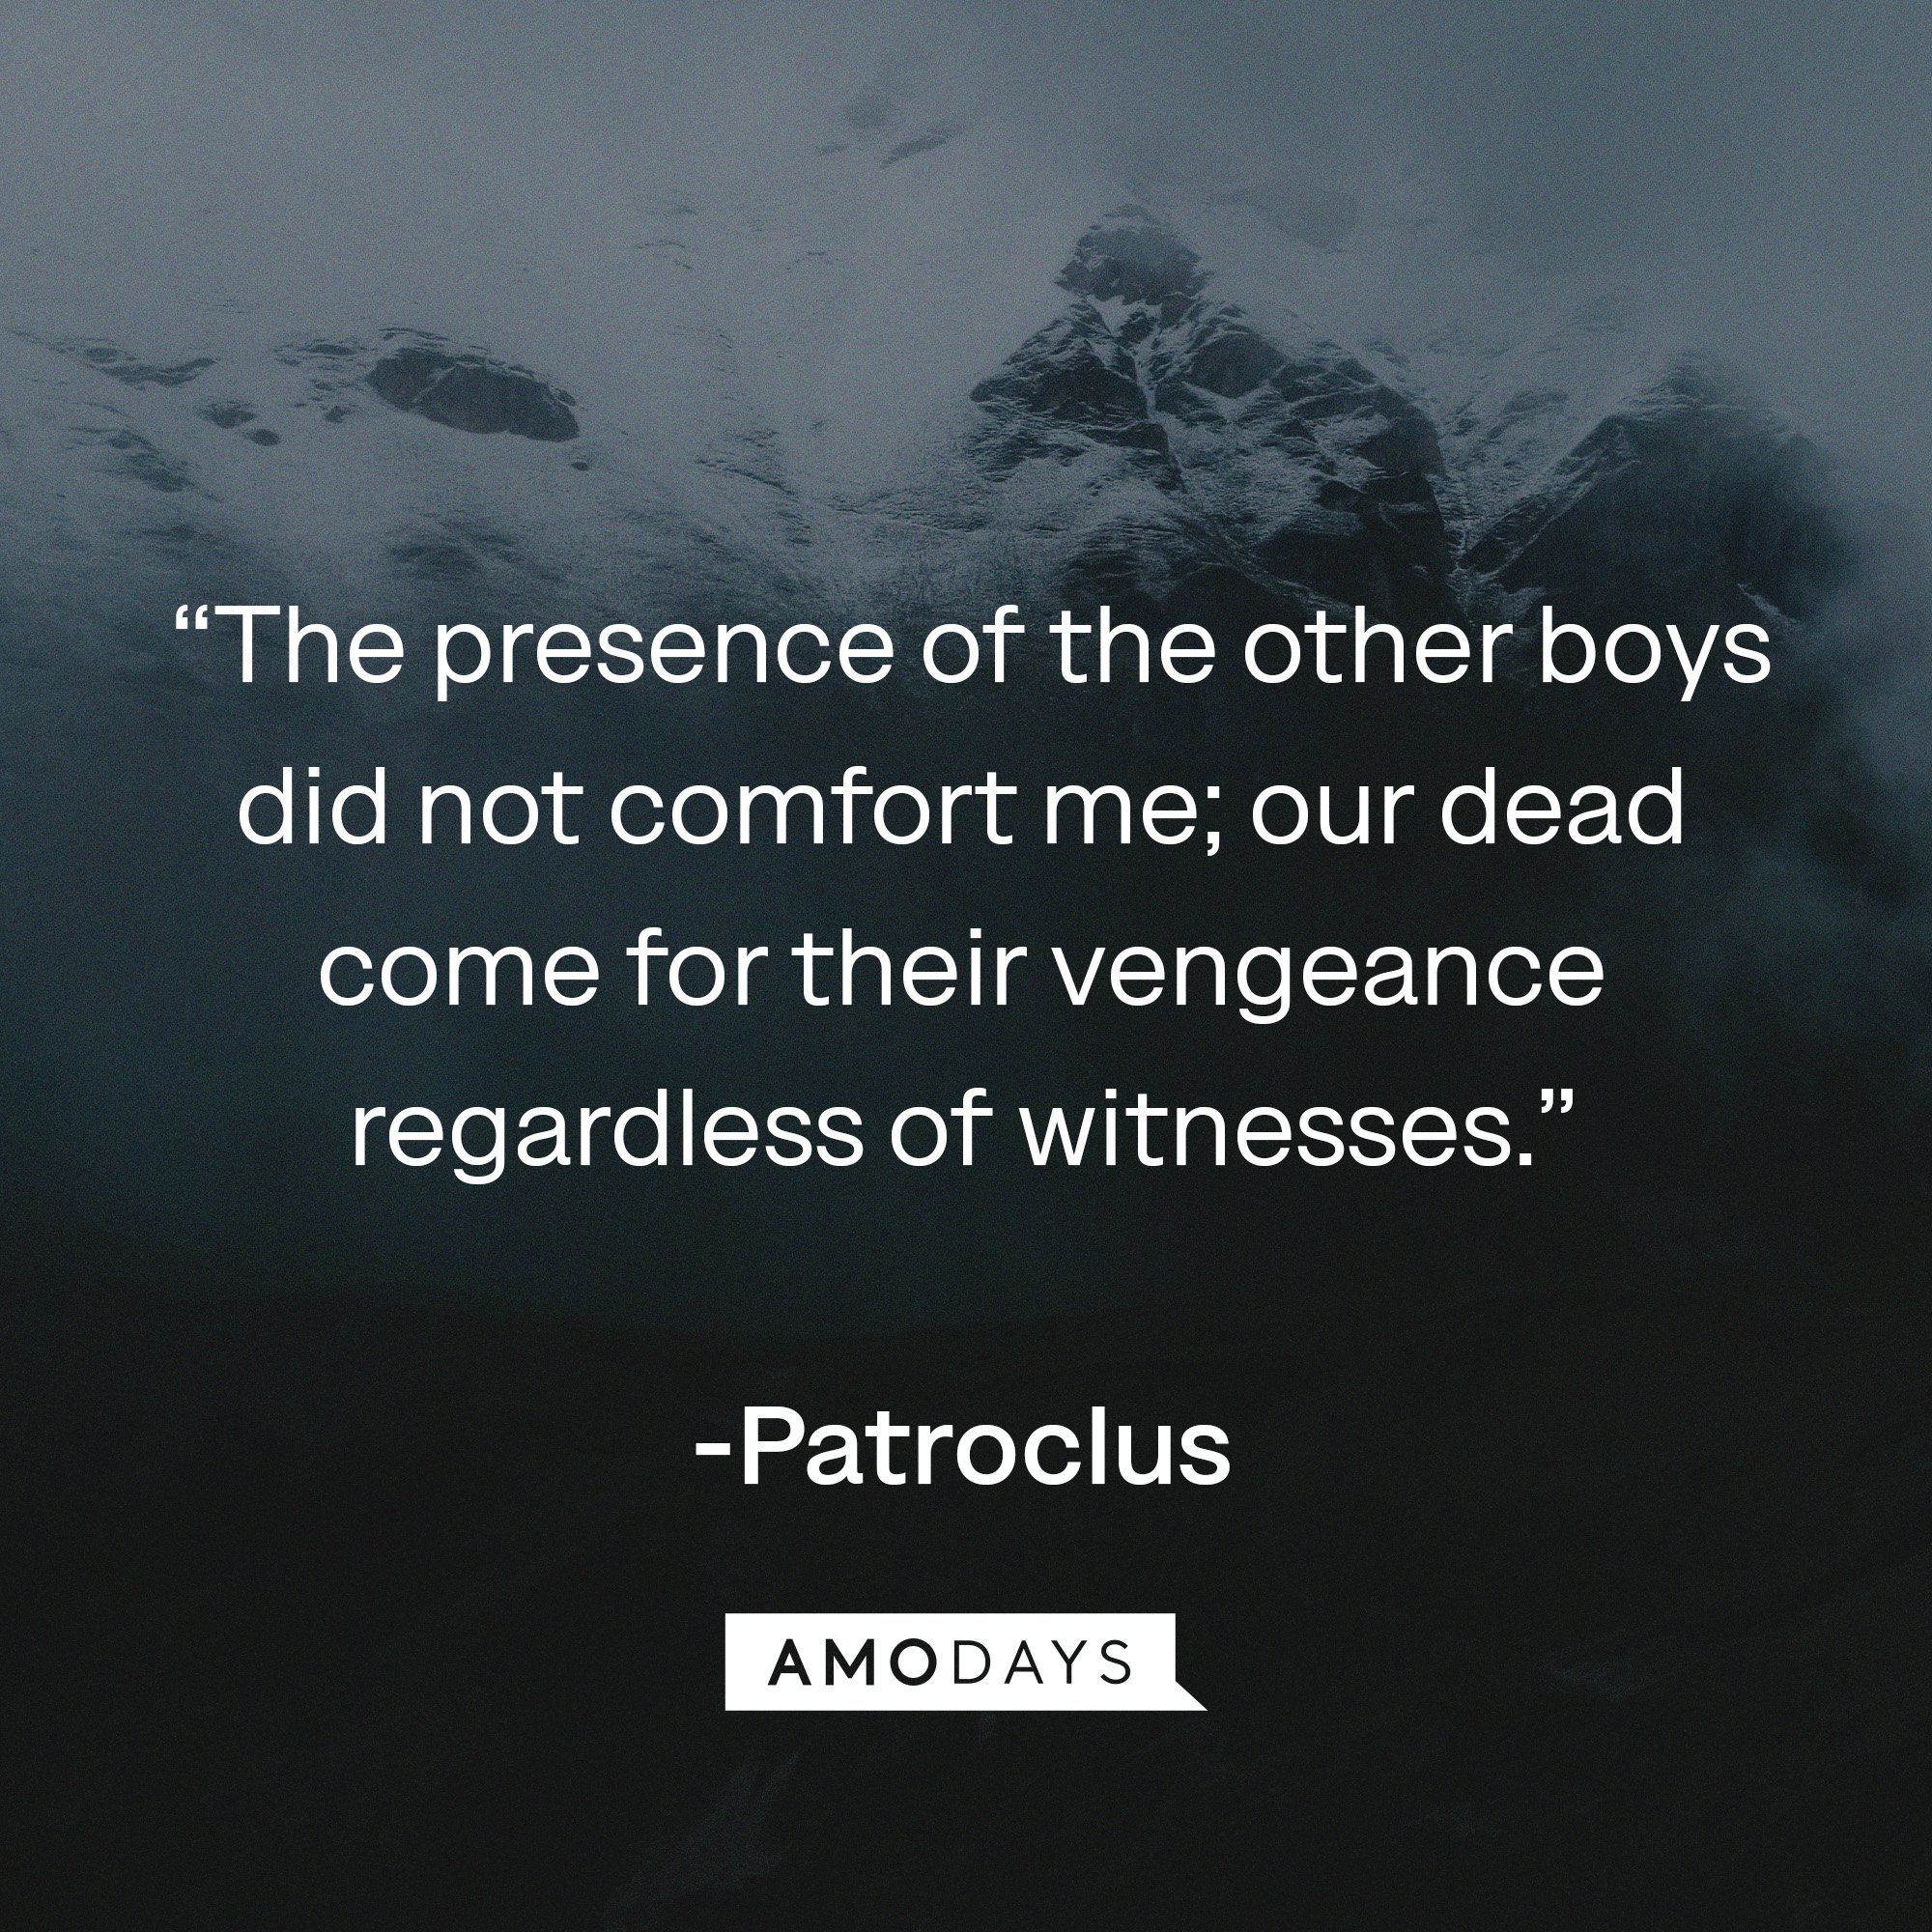  Patroclus's quote:  “The presence of the other boys did not comfort me; our dead come for their vengeance regardless of witnesses.” | Image: AmoDays